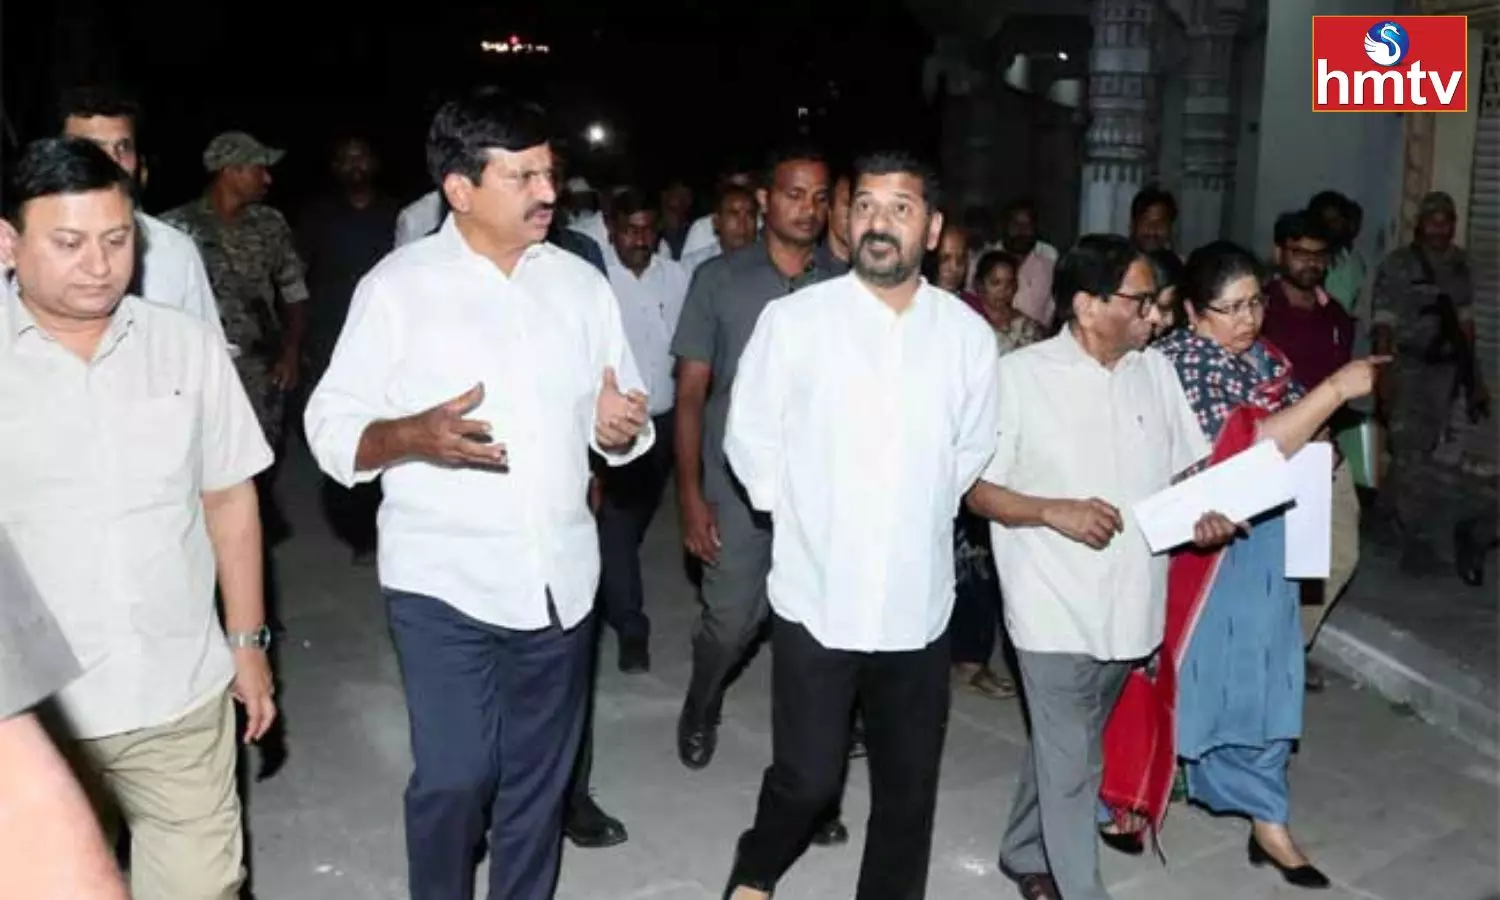 CM Revanth Reddy inspected the stalls in Shilparam, Hyderabad